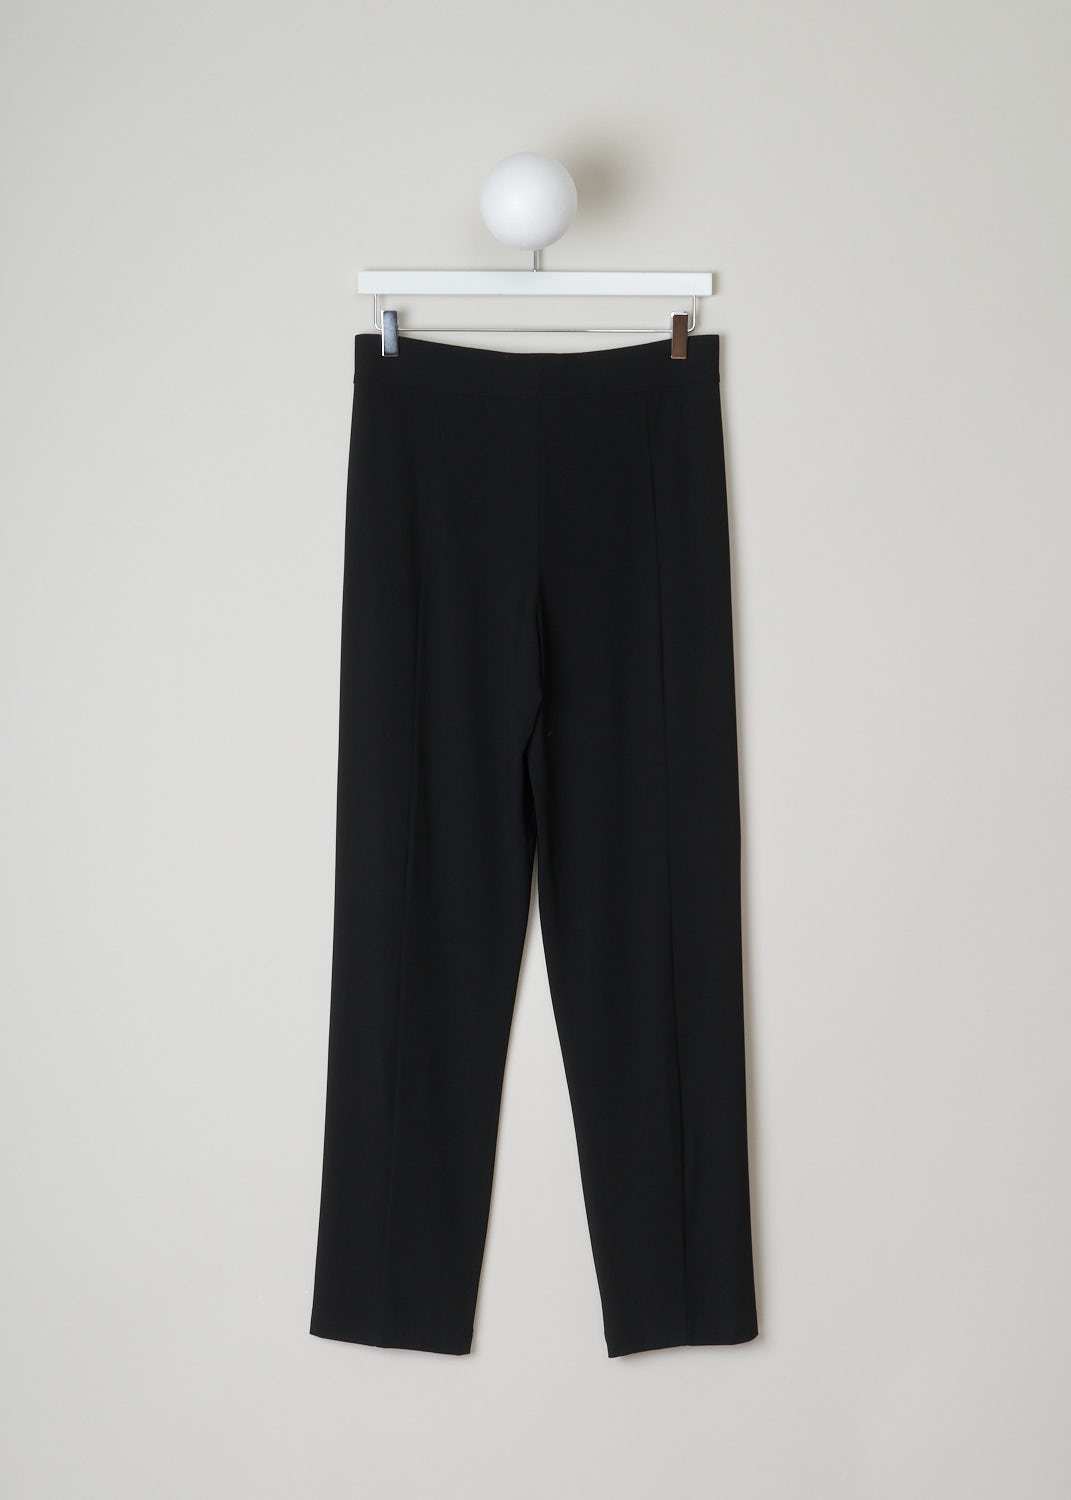 Donna Karan, Loose fit black stretch pants, A99P509J43_001_black, black, back, Comfy black pants, sits high and fitted on the waist, with a loose fit throughout the legs. Made from a thin airy fabric which contains a high stretch factor for that extra bit of comfort. Comes with forward slanted slip in pockets. No fastening option available on this model.  